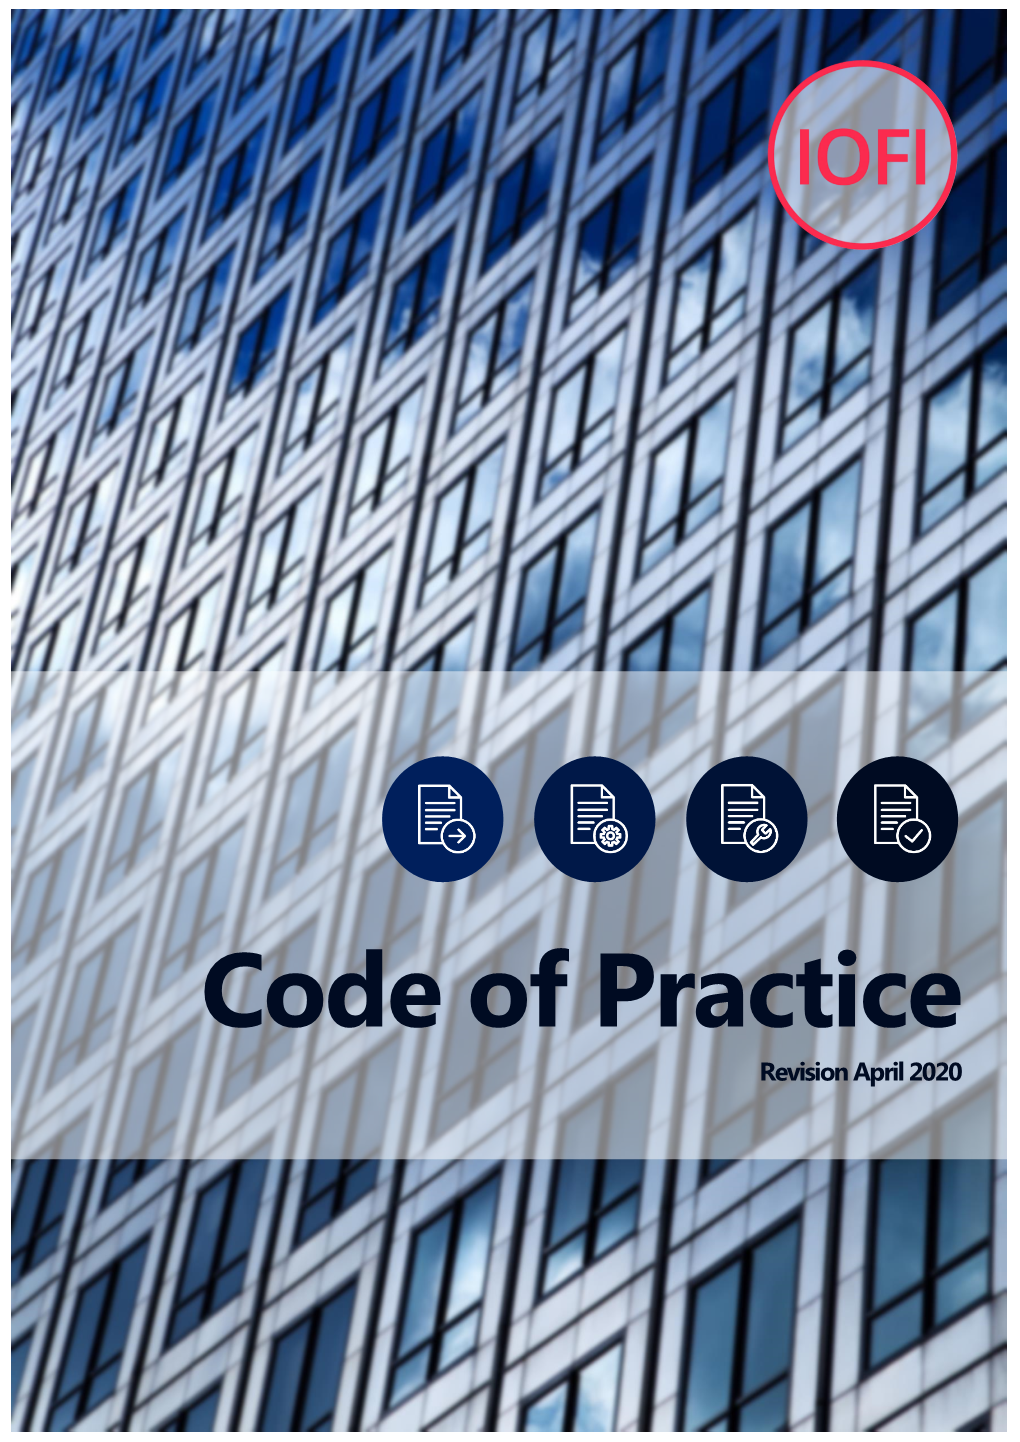 IOFI Code of Practice (Cop) in Good Faith Using the Most Accurate Information Available